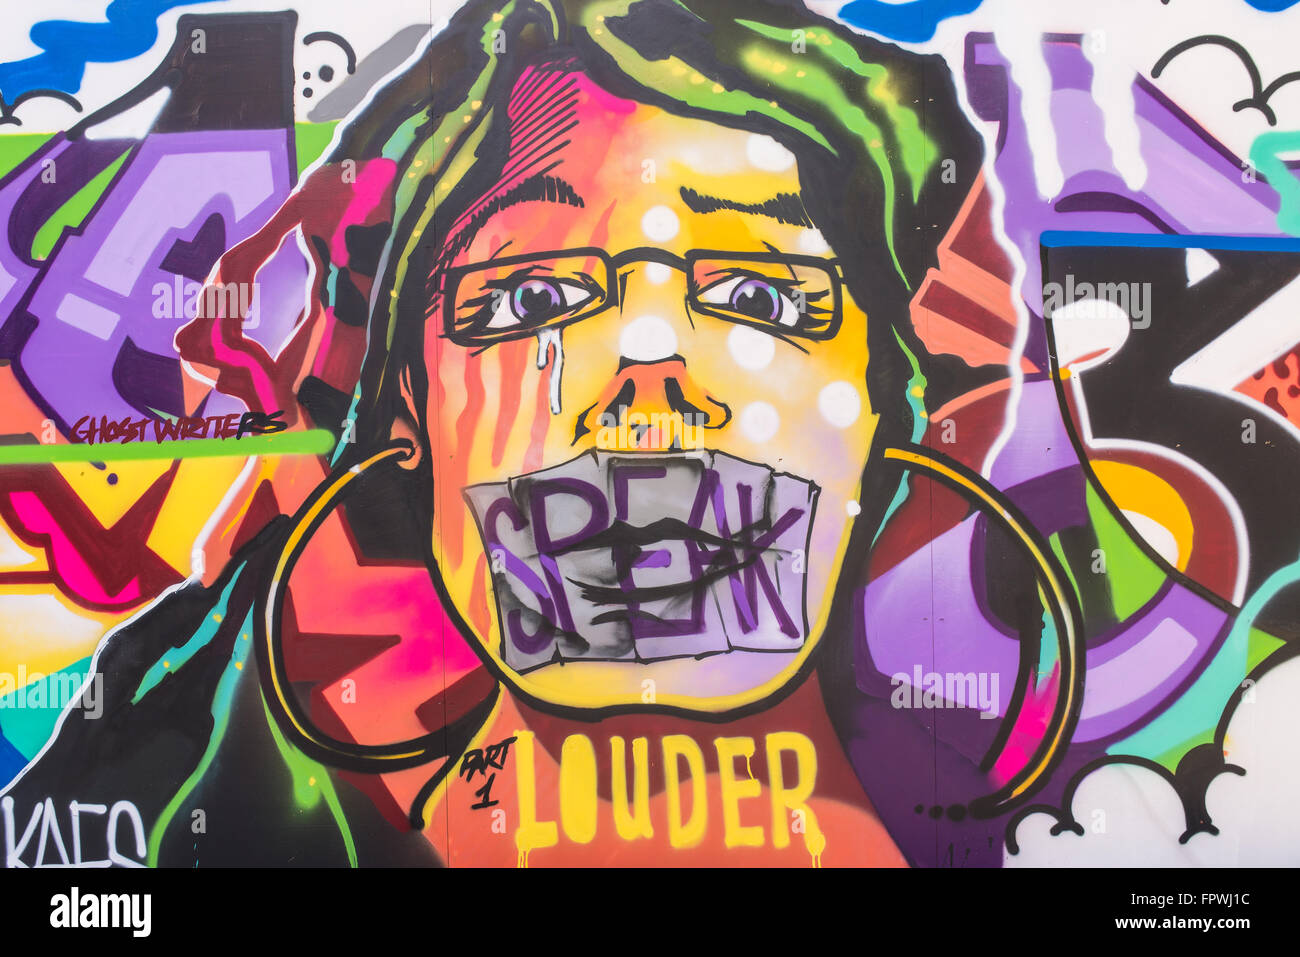 Street art mural showing a woman face with the mouth taped shut and the words 'Speak louder'. Stock Photo